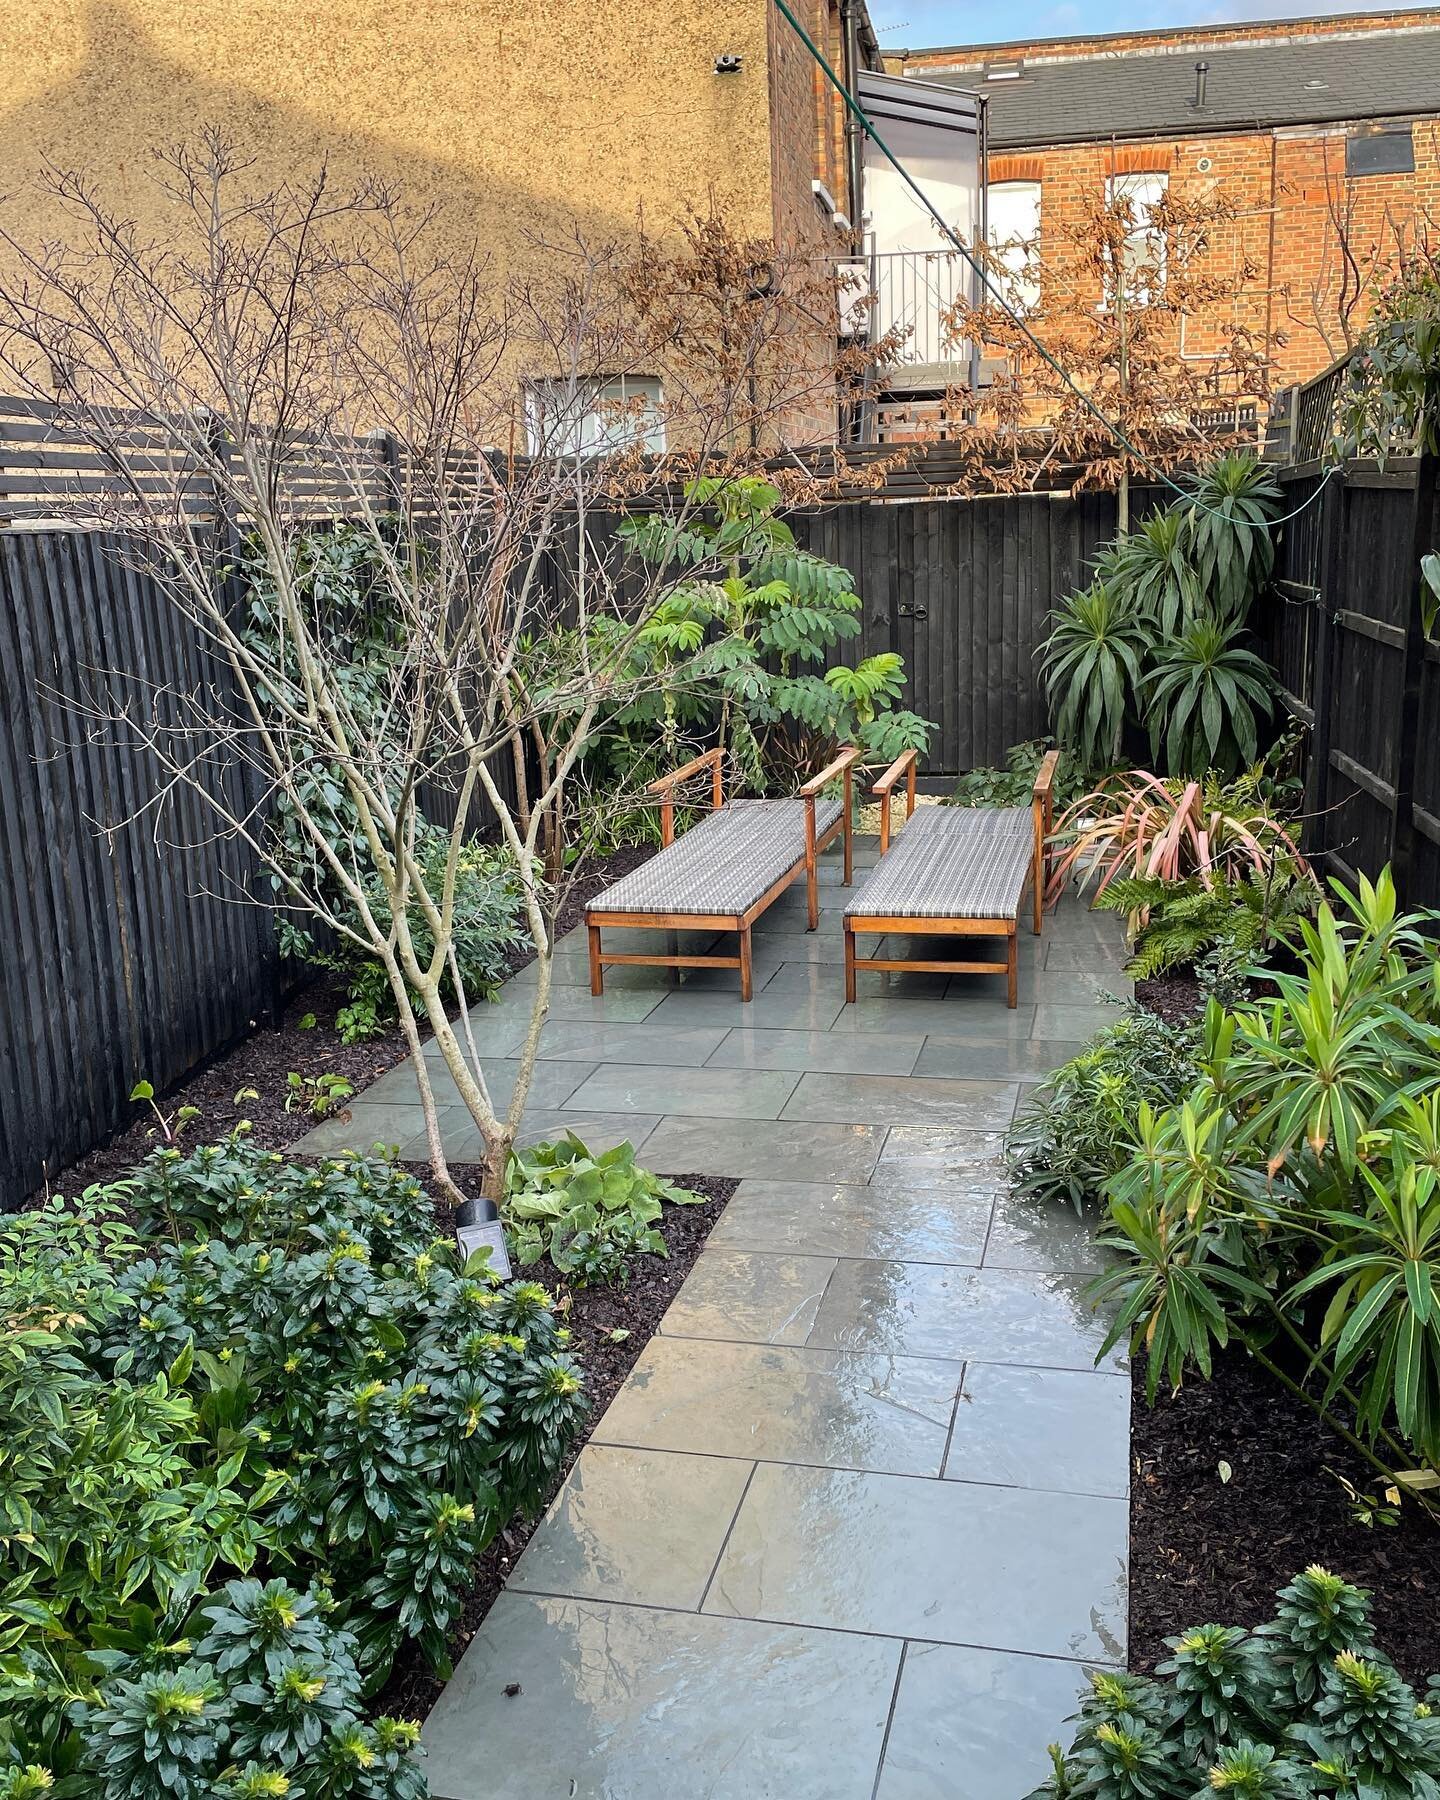 Our shady planting structure  before the spring breaks! 1. Overall design 2. Magnolia foveolata, phormium and nandina domestica with shady underplanting 3. Fav hellebore (foetidus) with sarcococca and trachystemon 4. Potted Schefflera fantsipanensis 